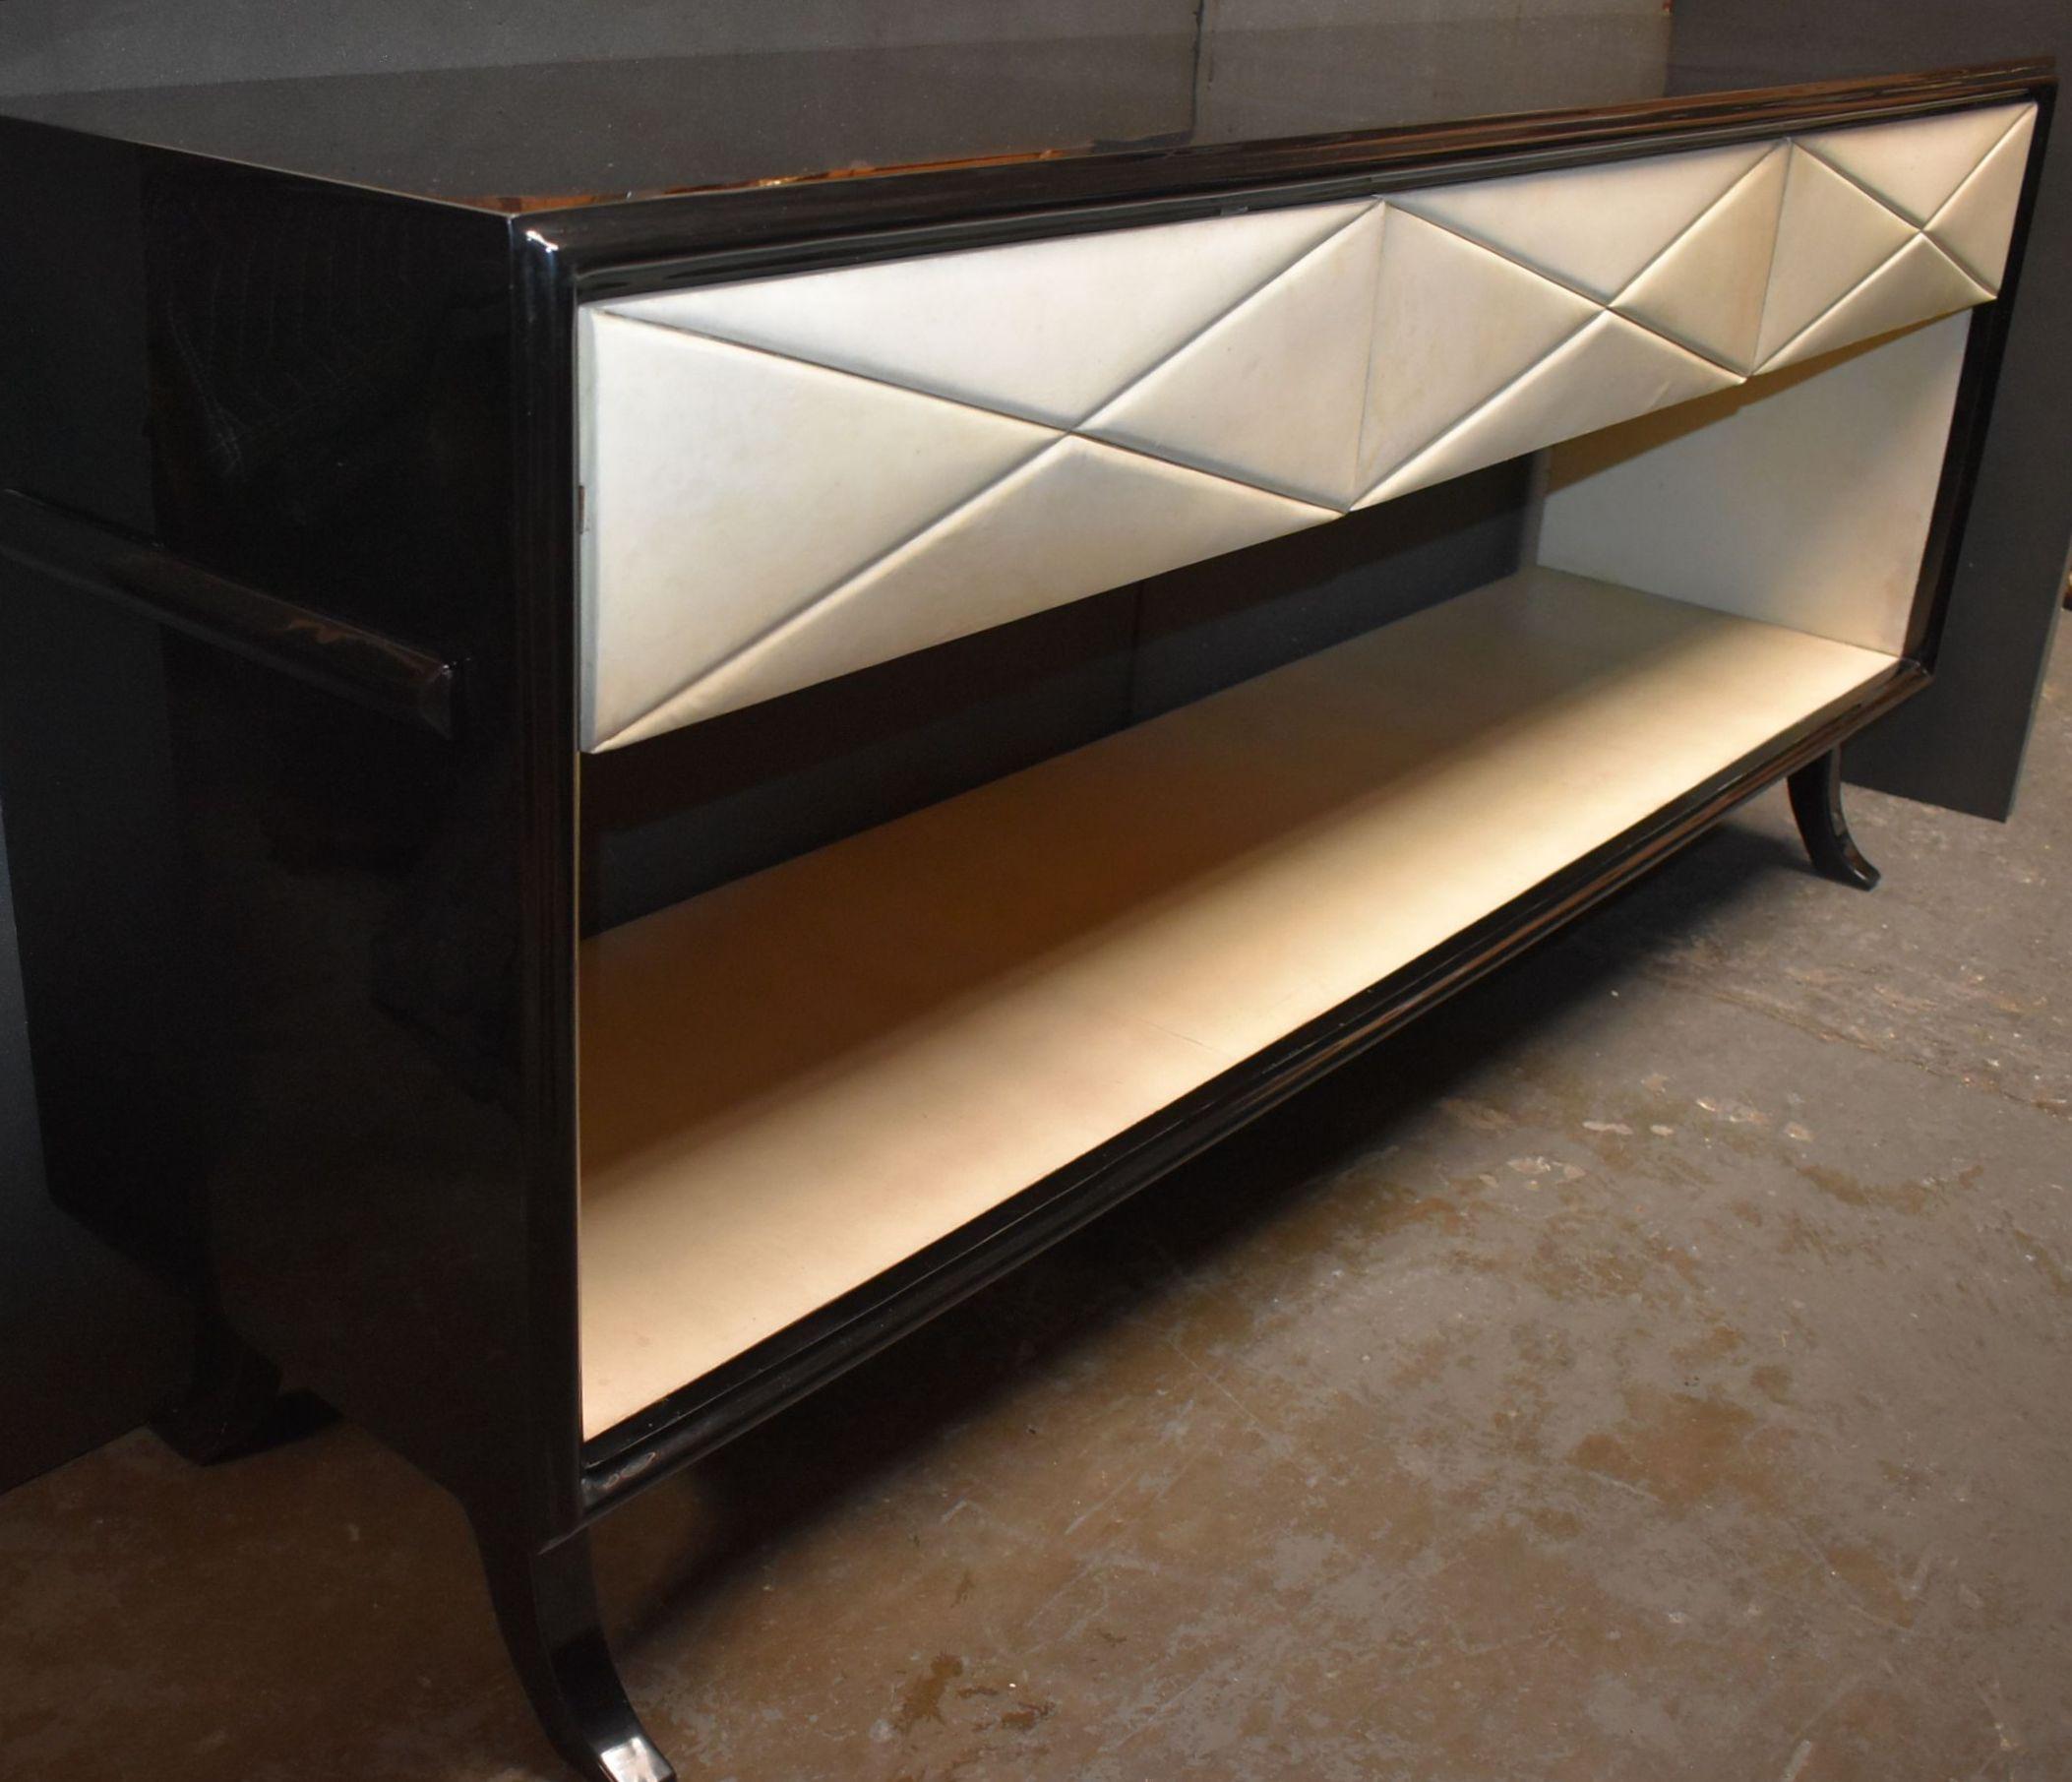 Three pillows style drawers with open shelf sideboard, console (The interior opening show parchment details) cover with natural goatskin and resin over black painted finish. Also there is pullout / pull-out tray on each side.

Please note: Small